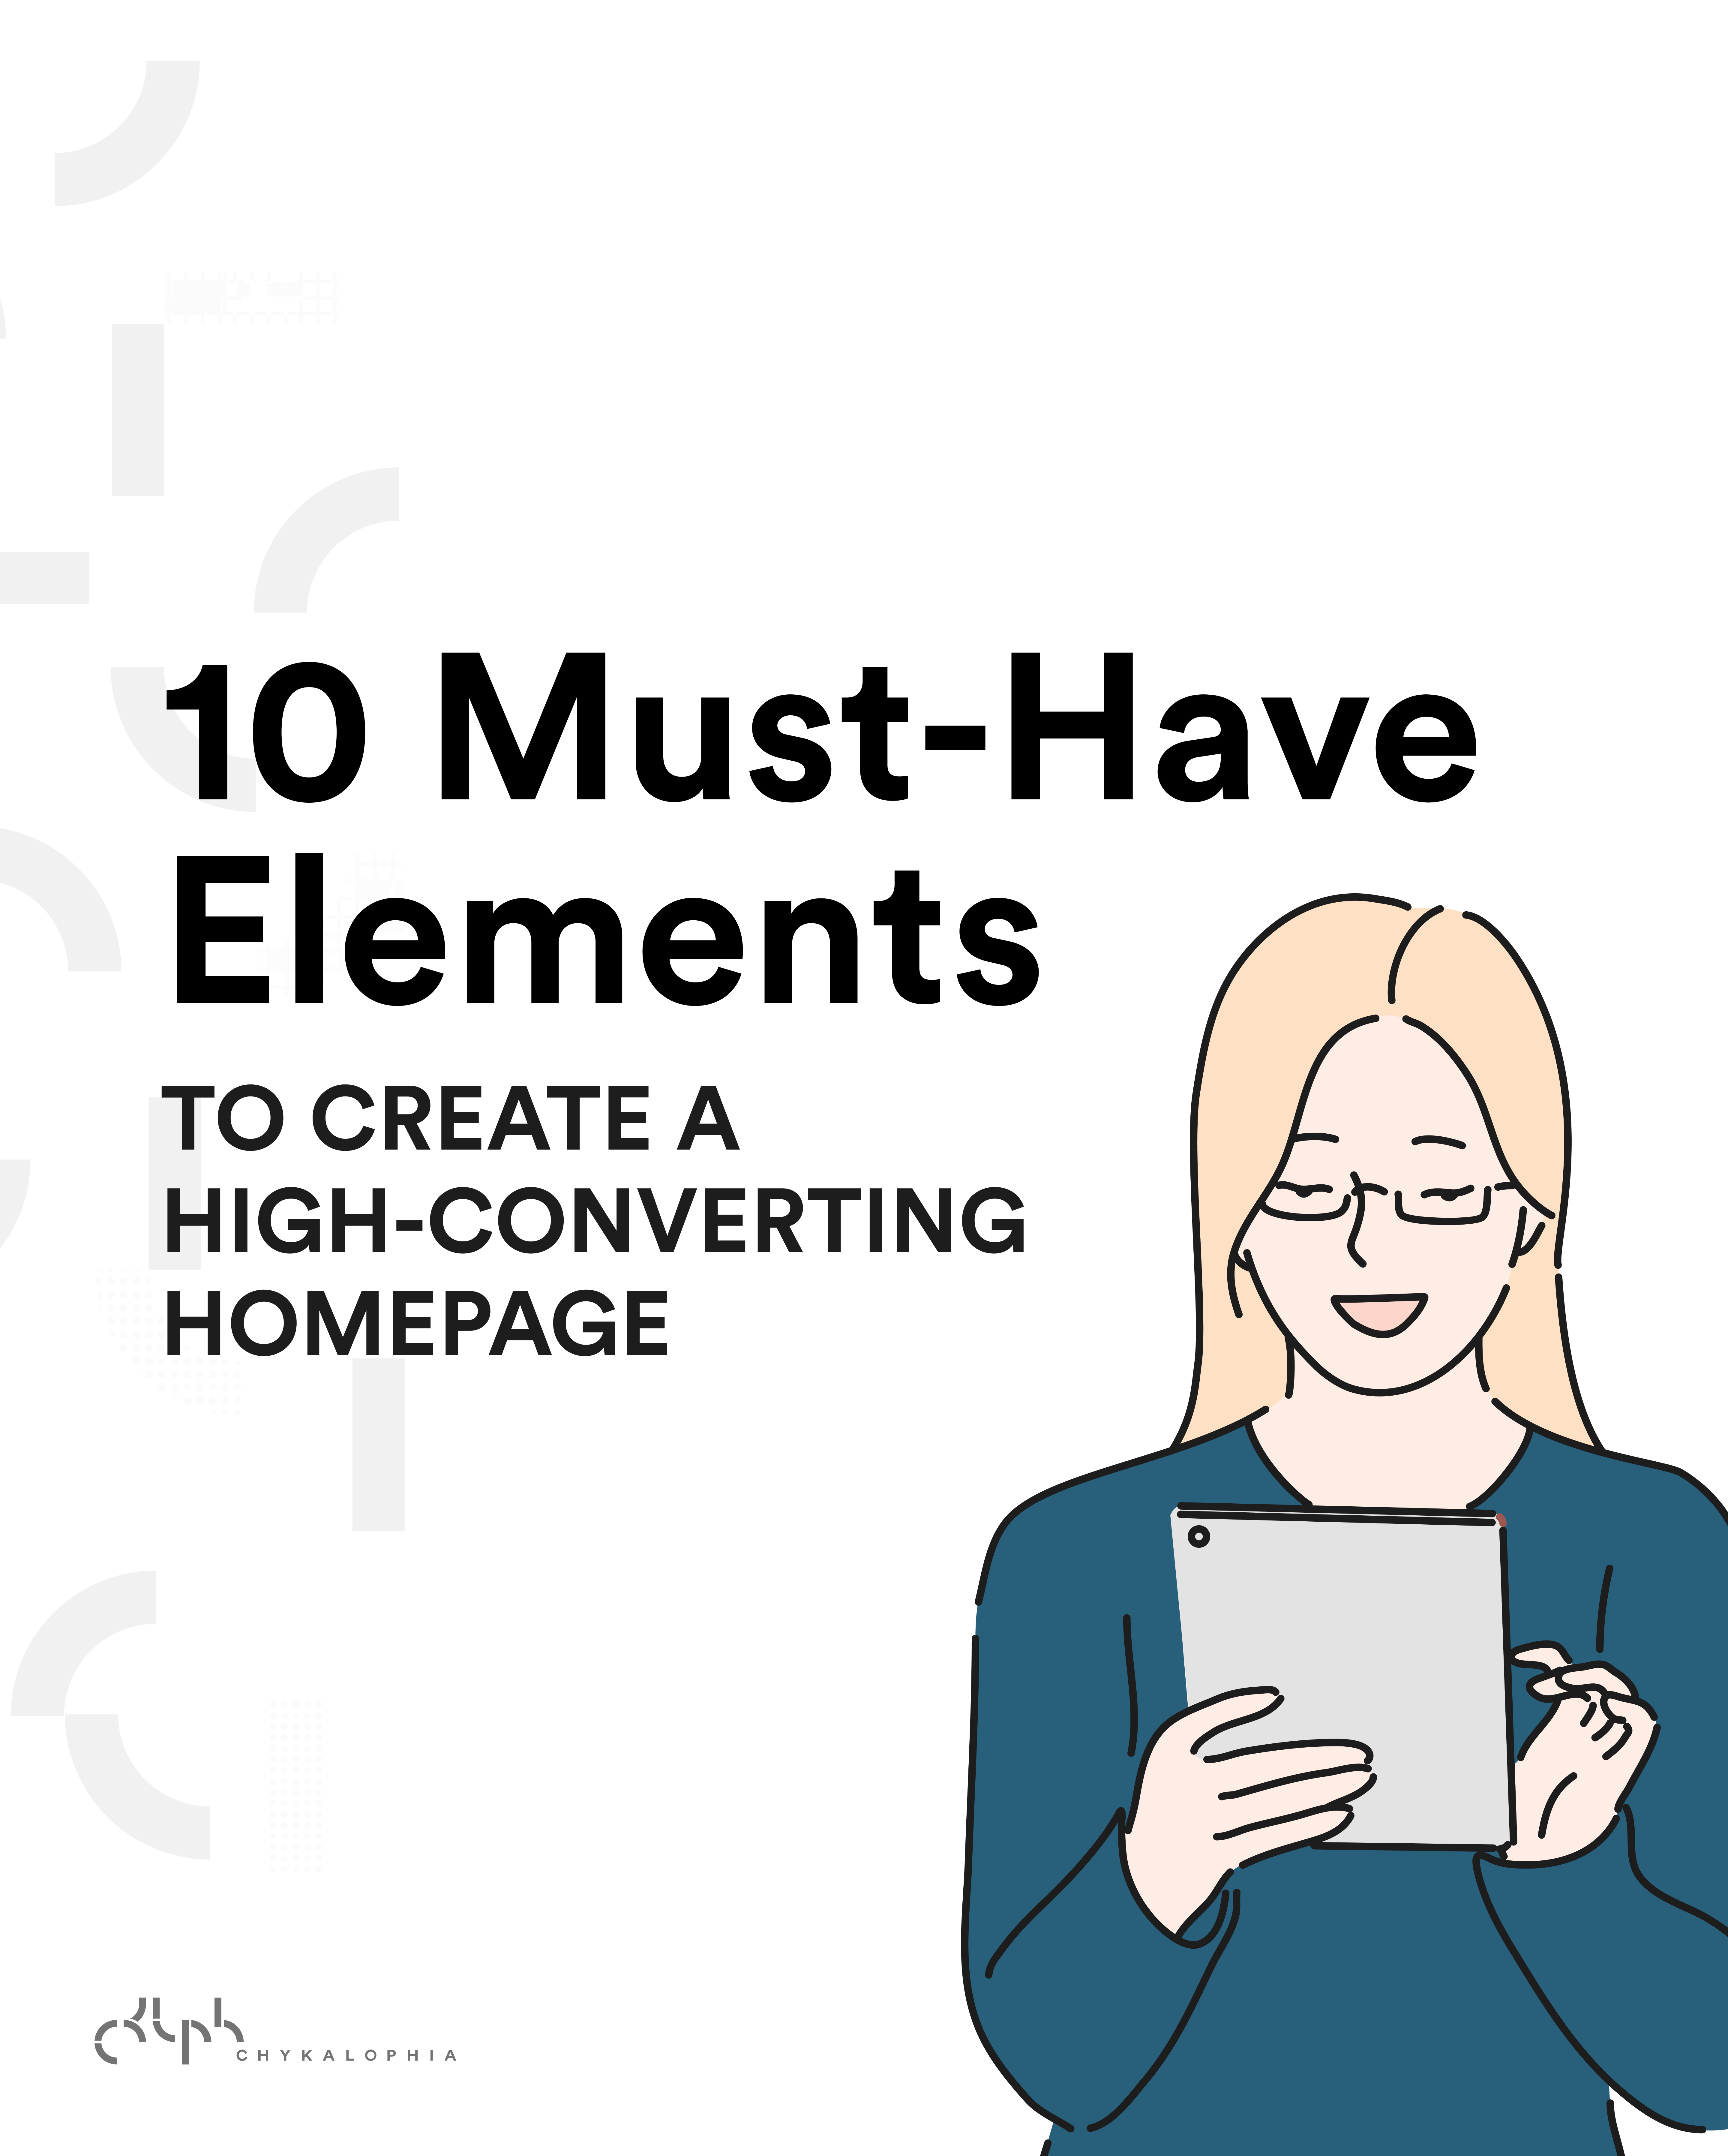 10 Must-Have Elements to Create a High Converting Homepage